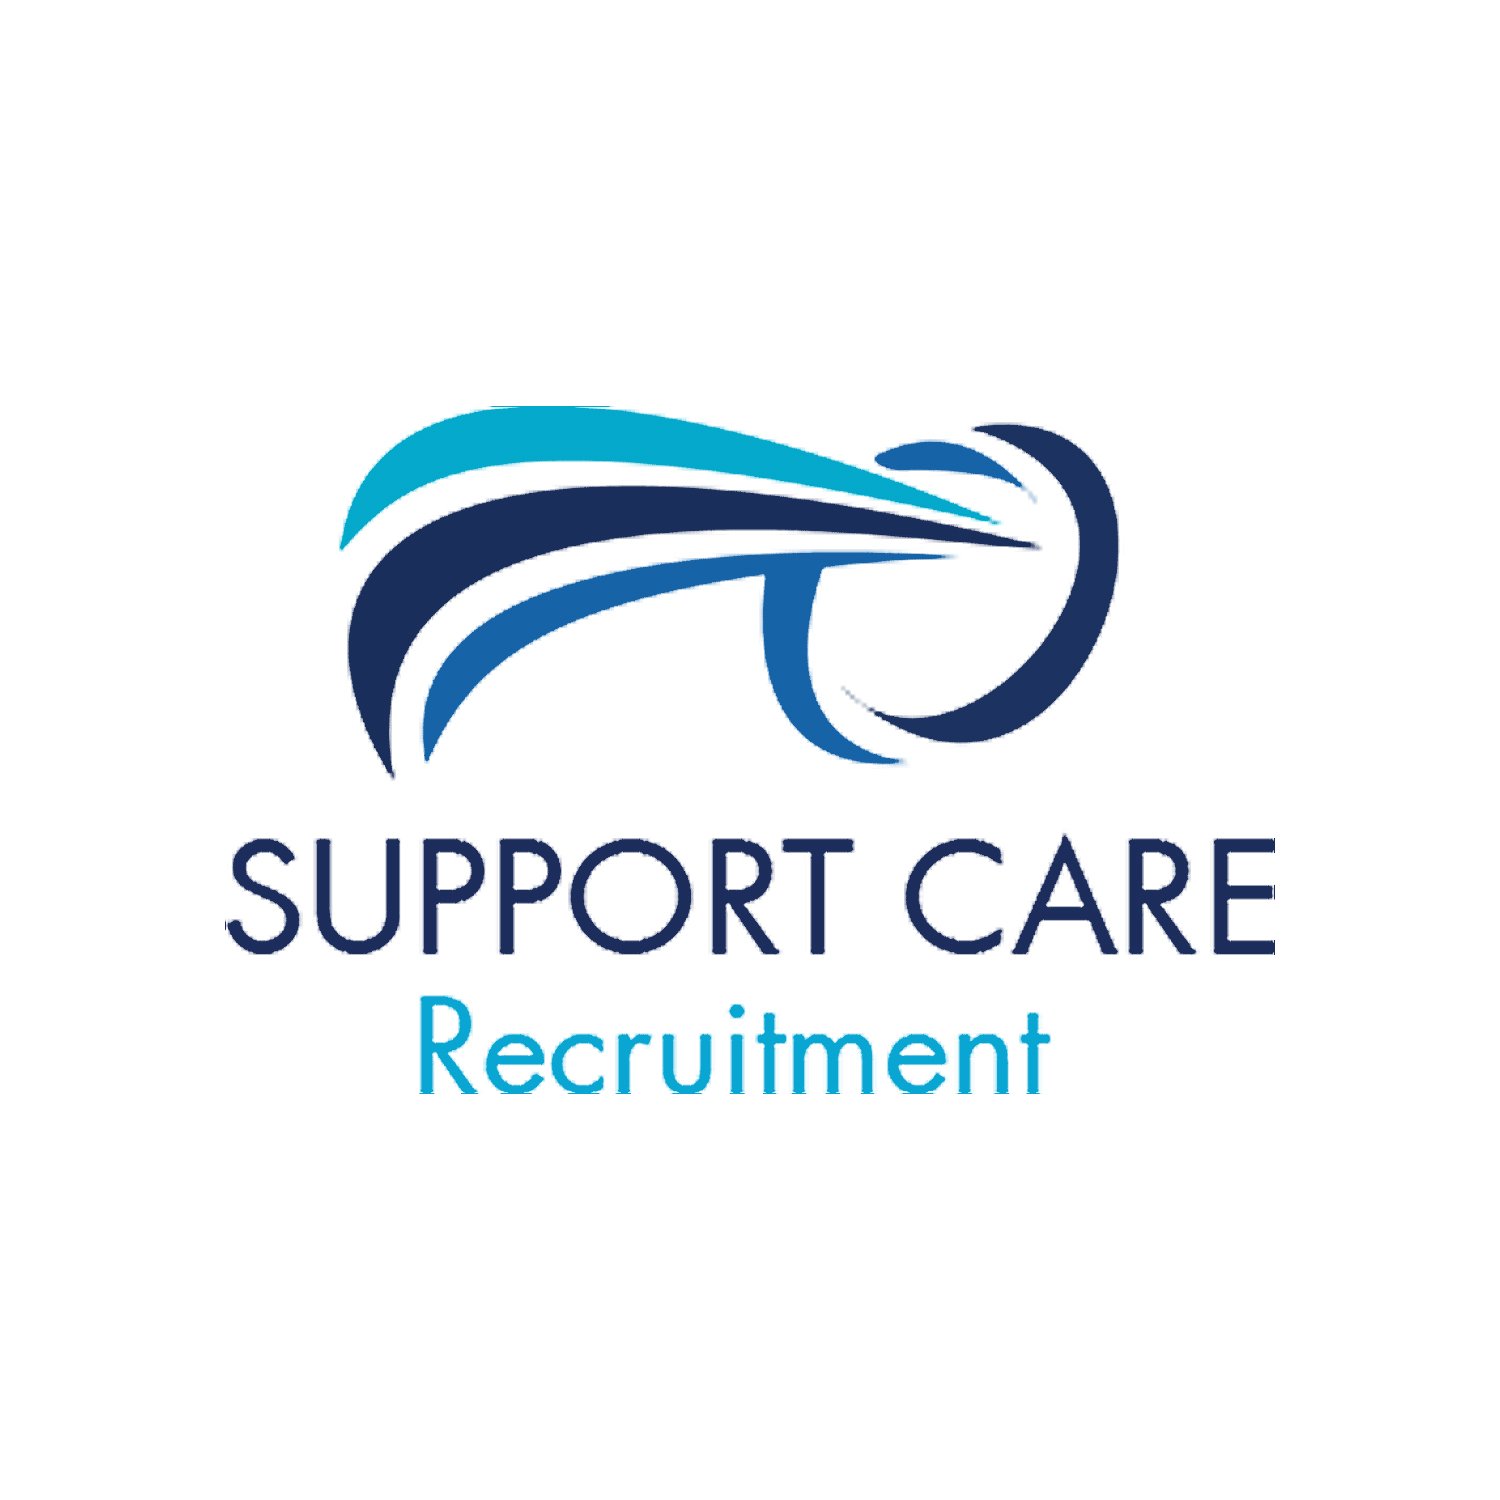 Support care logo